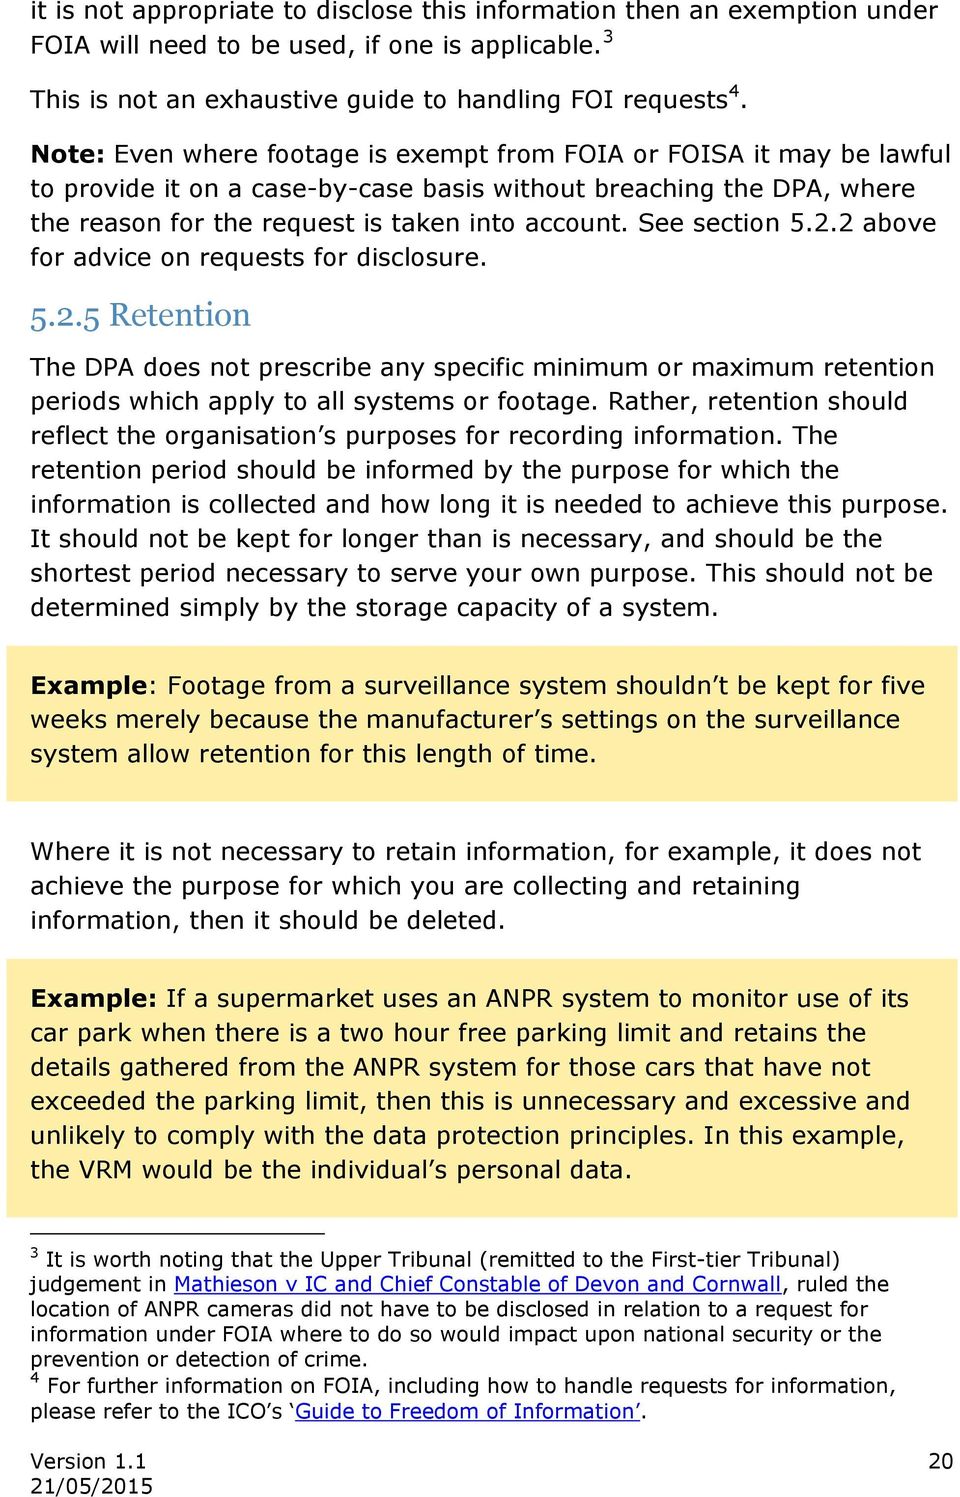 See section 5.2.2 above for advice on requests for disclosure. 5.2.5 Retention The DPA does not prescribe any specific minimum or maximum retention periods which apply to all systems or footage.